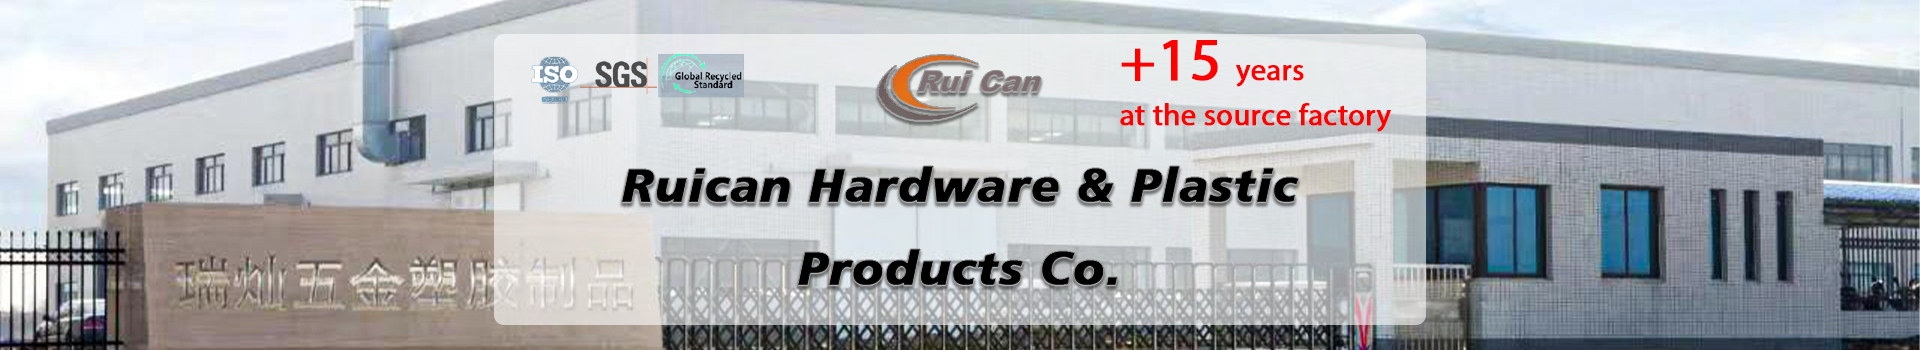 Ruican Hardware & Plastic Products Co.